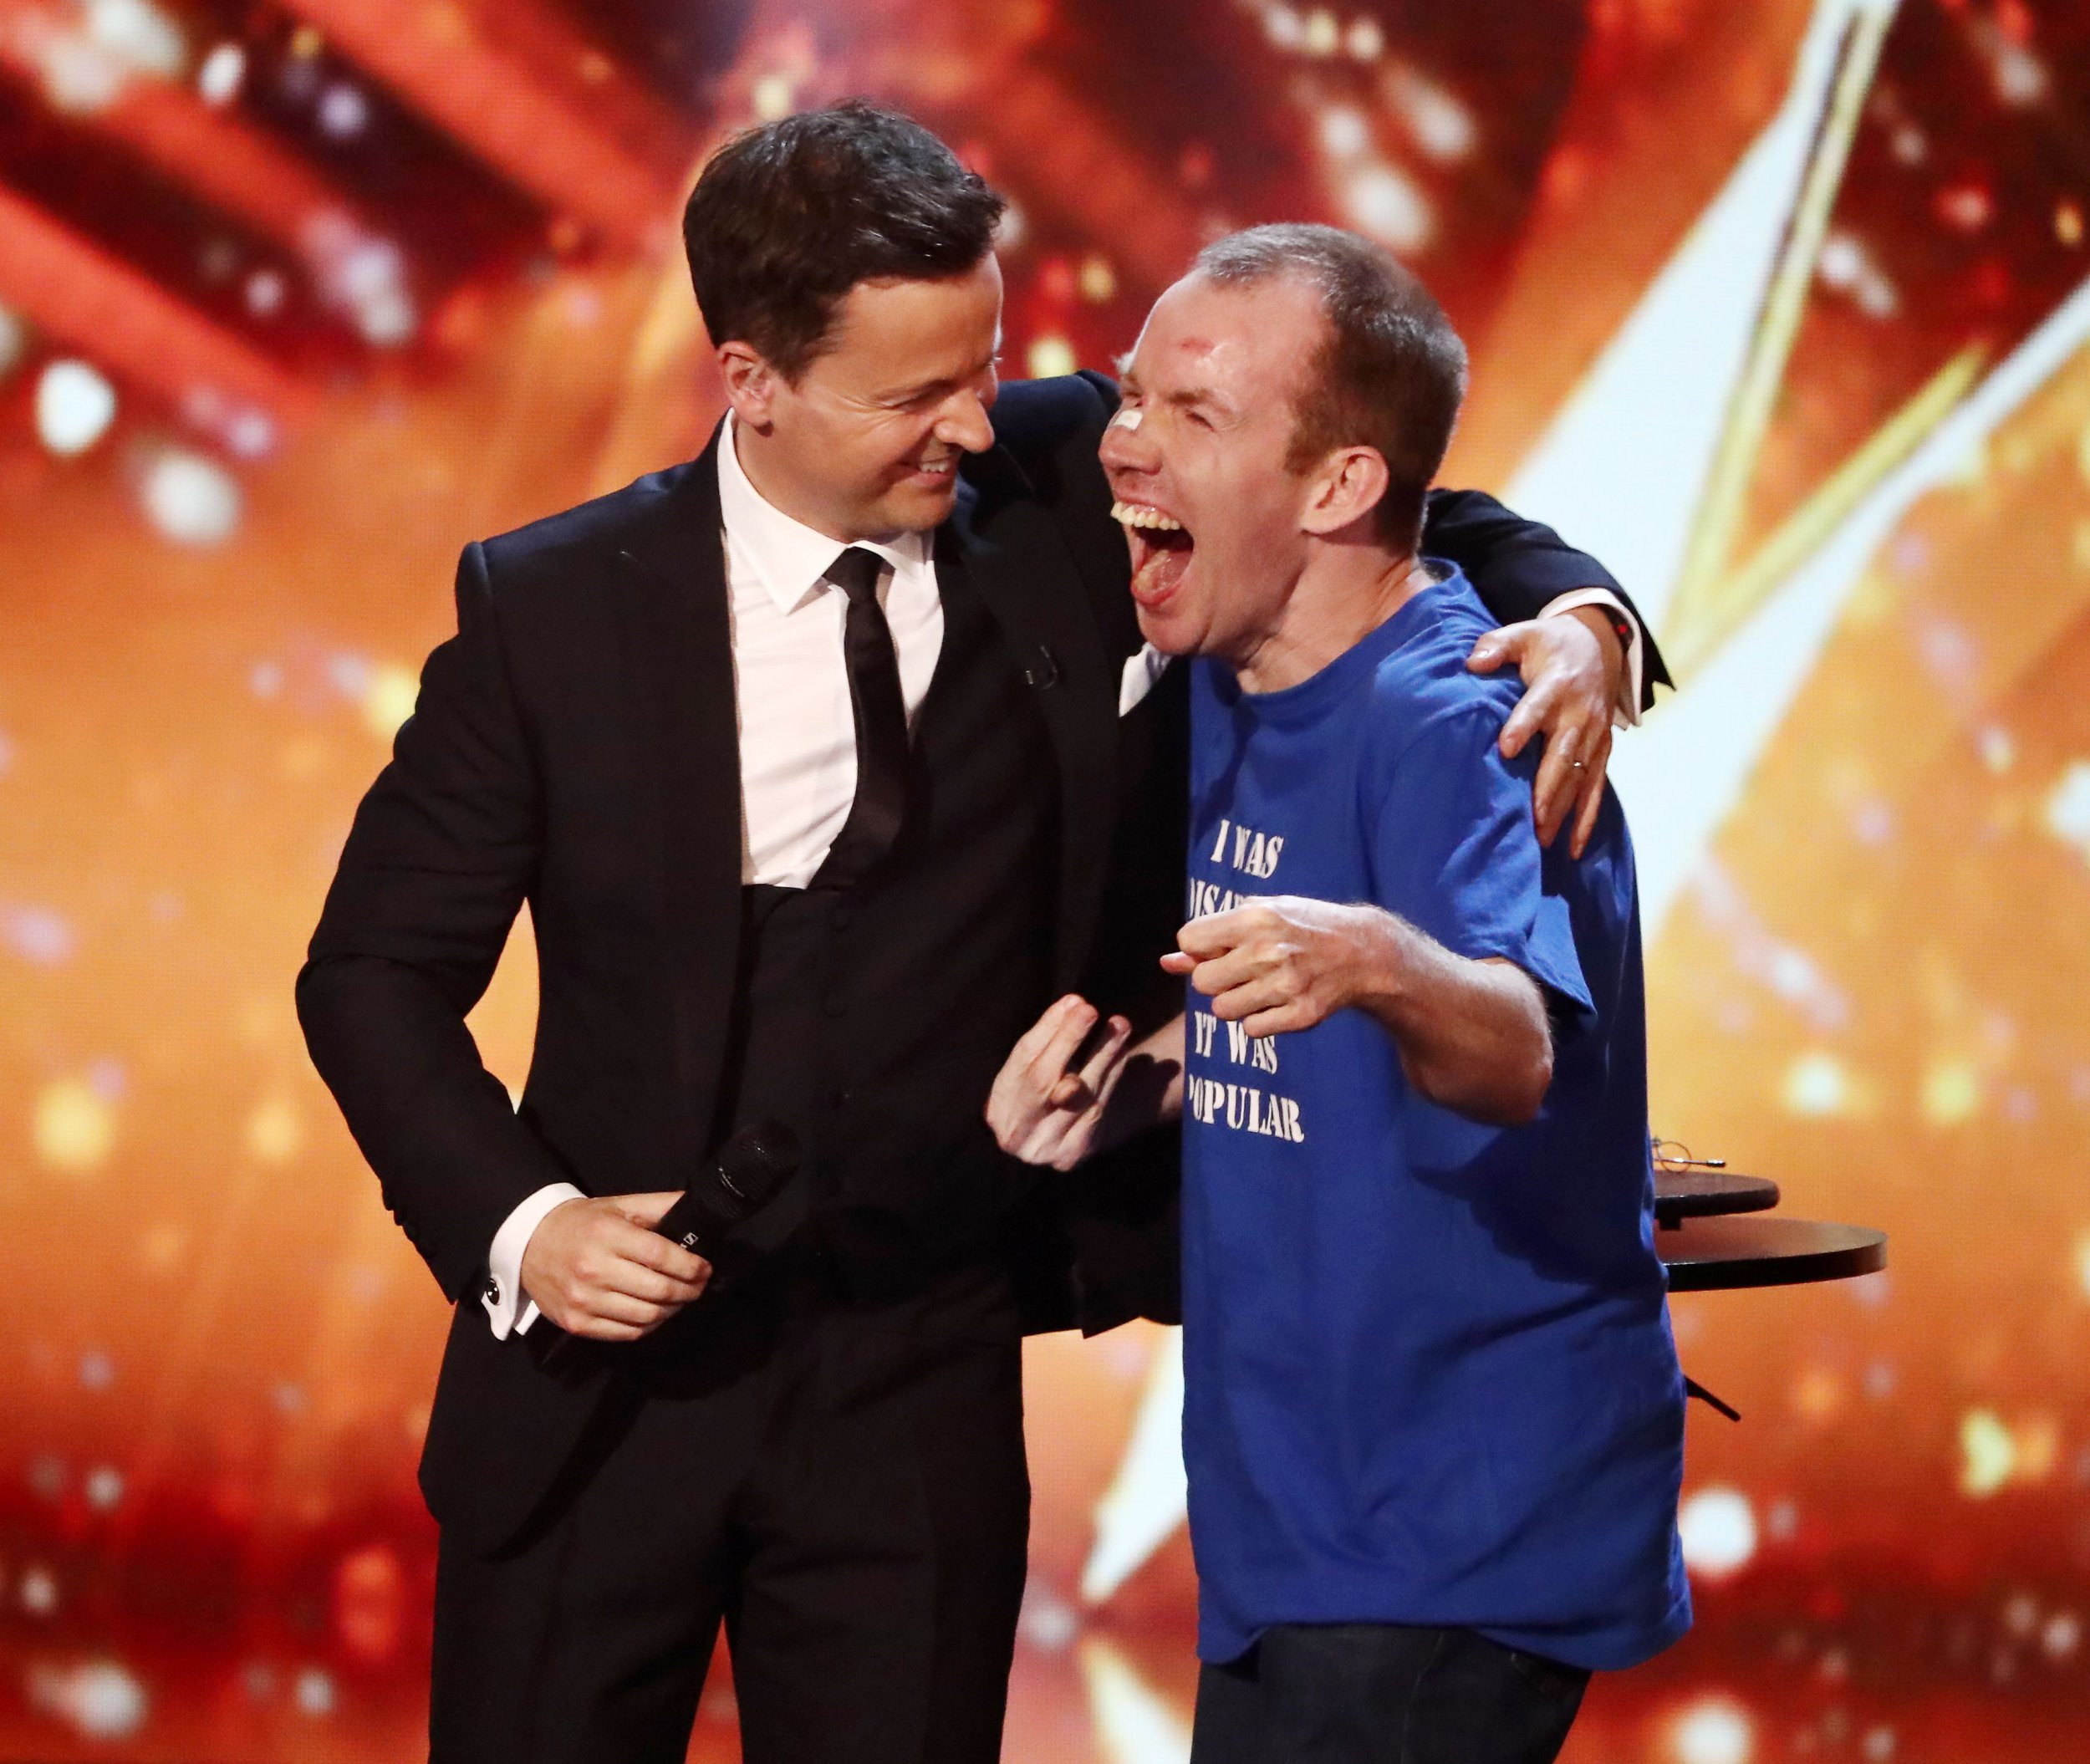 Britain’s Got Talent star Lost Voice Guy wants to tell parents he loves them in Geordie accent amid search for new voice